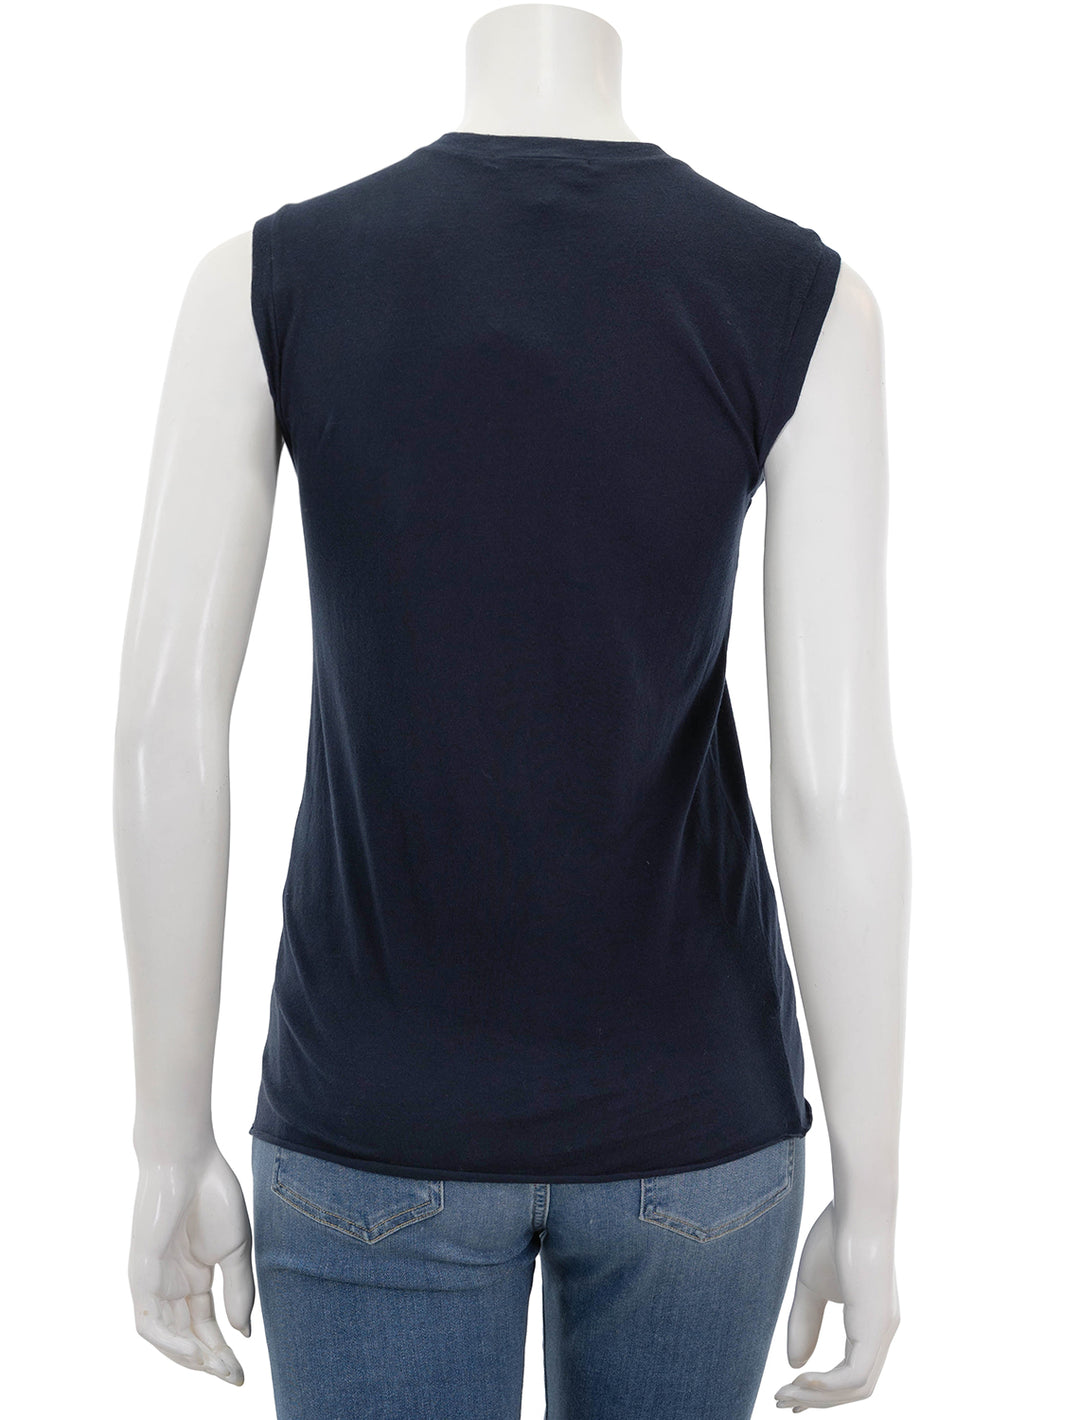 Back view of Nili Lotan's muscle tee in navy.